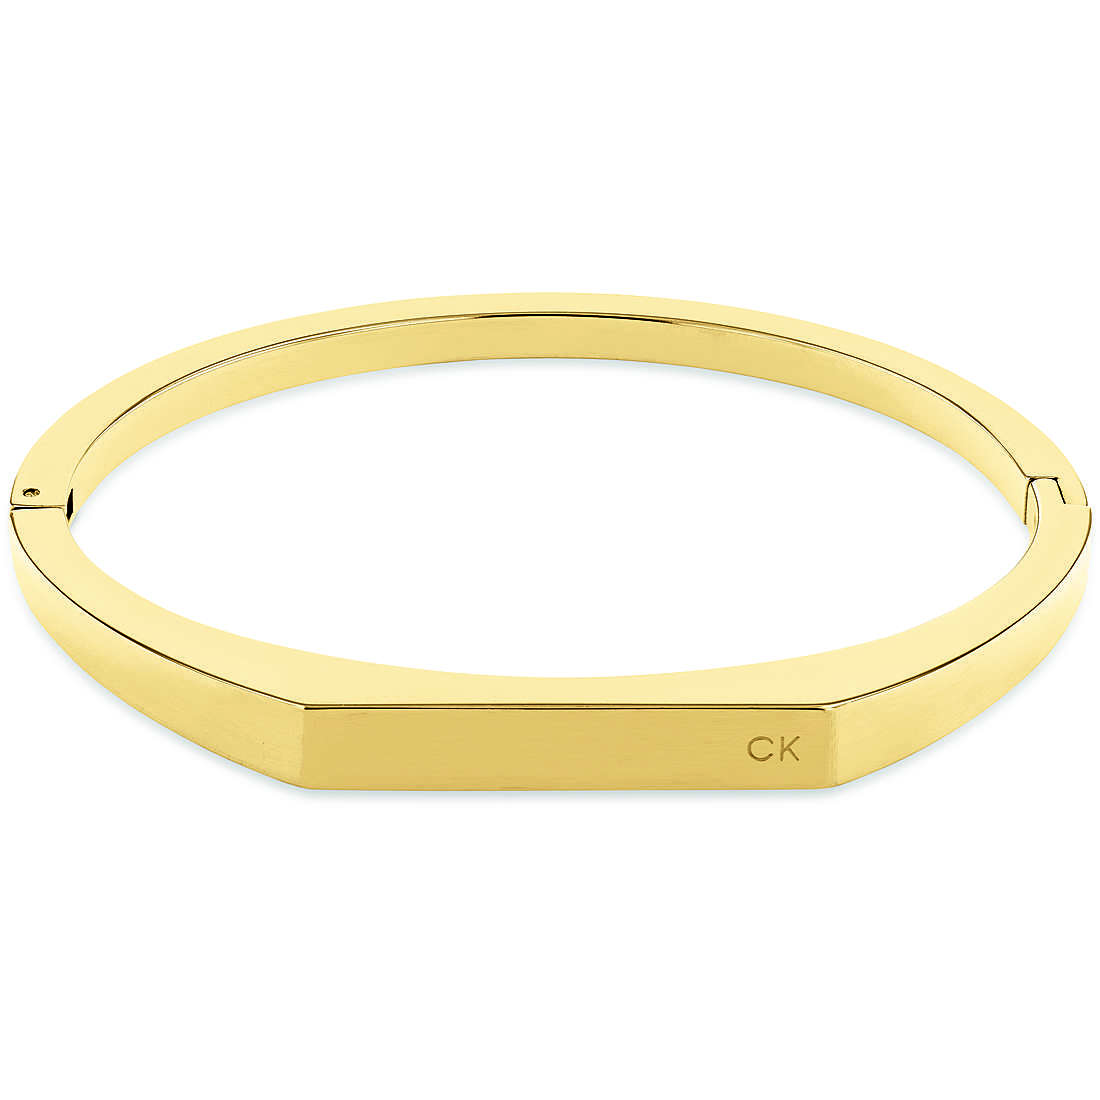 Buy Calvin Klein Jewelry Women's Bangle, Color: Carnation (Model:  35000162), Medium, Stainless Steel, no gemstone at Amazon.in